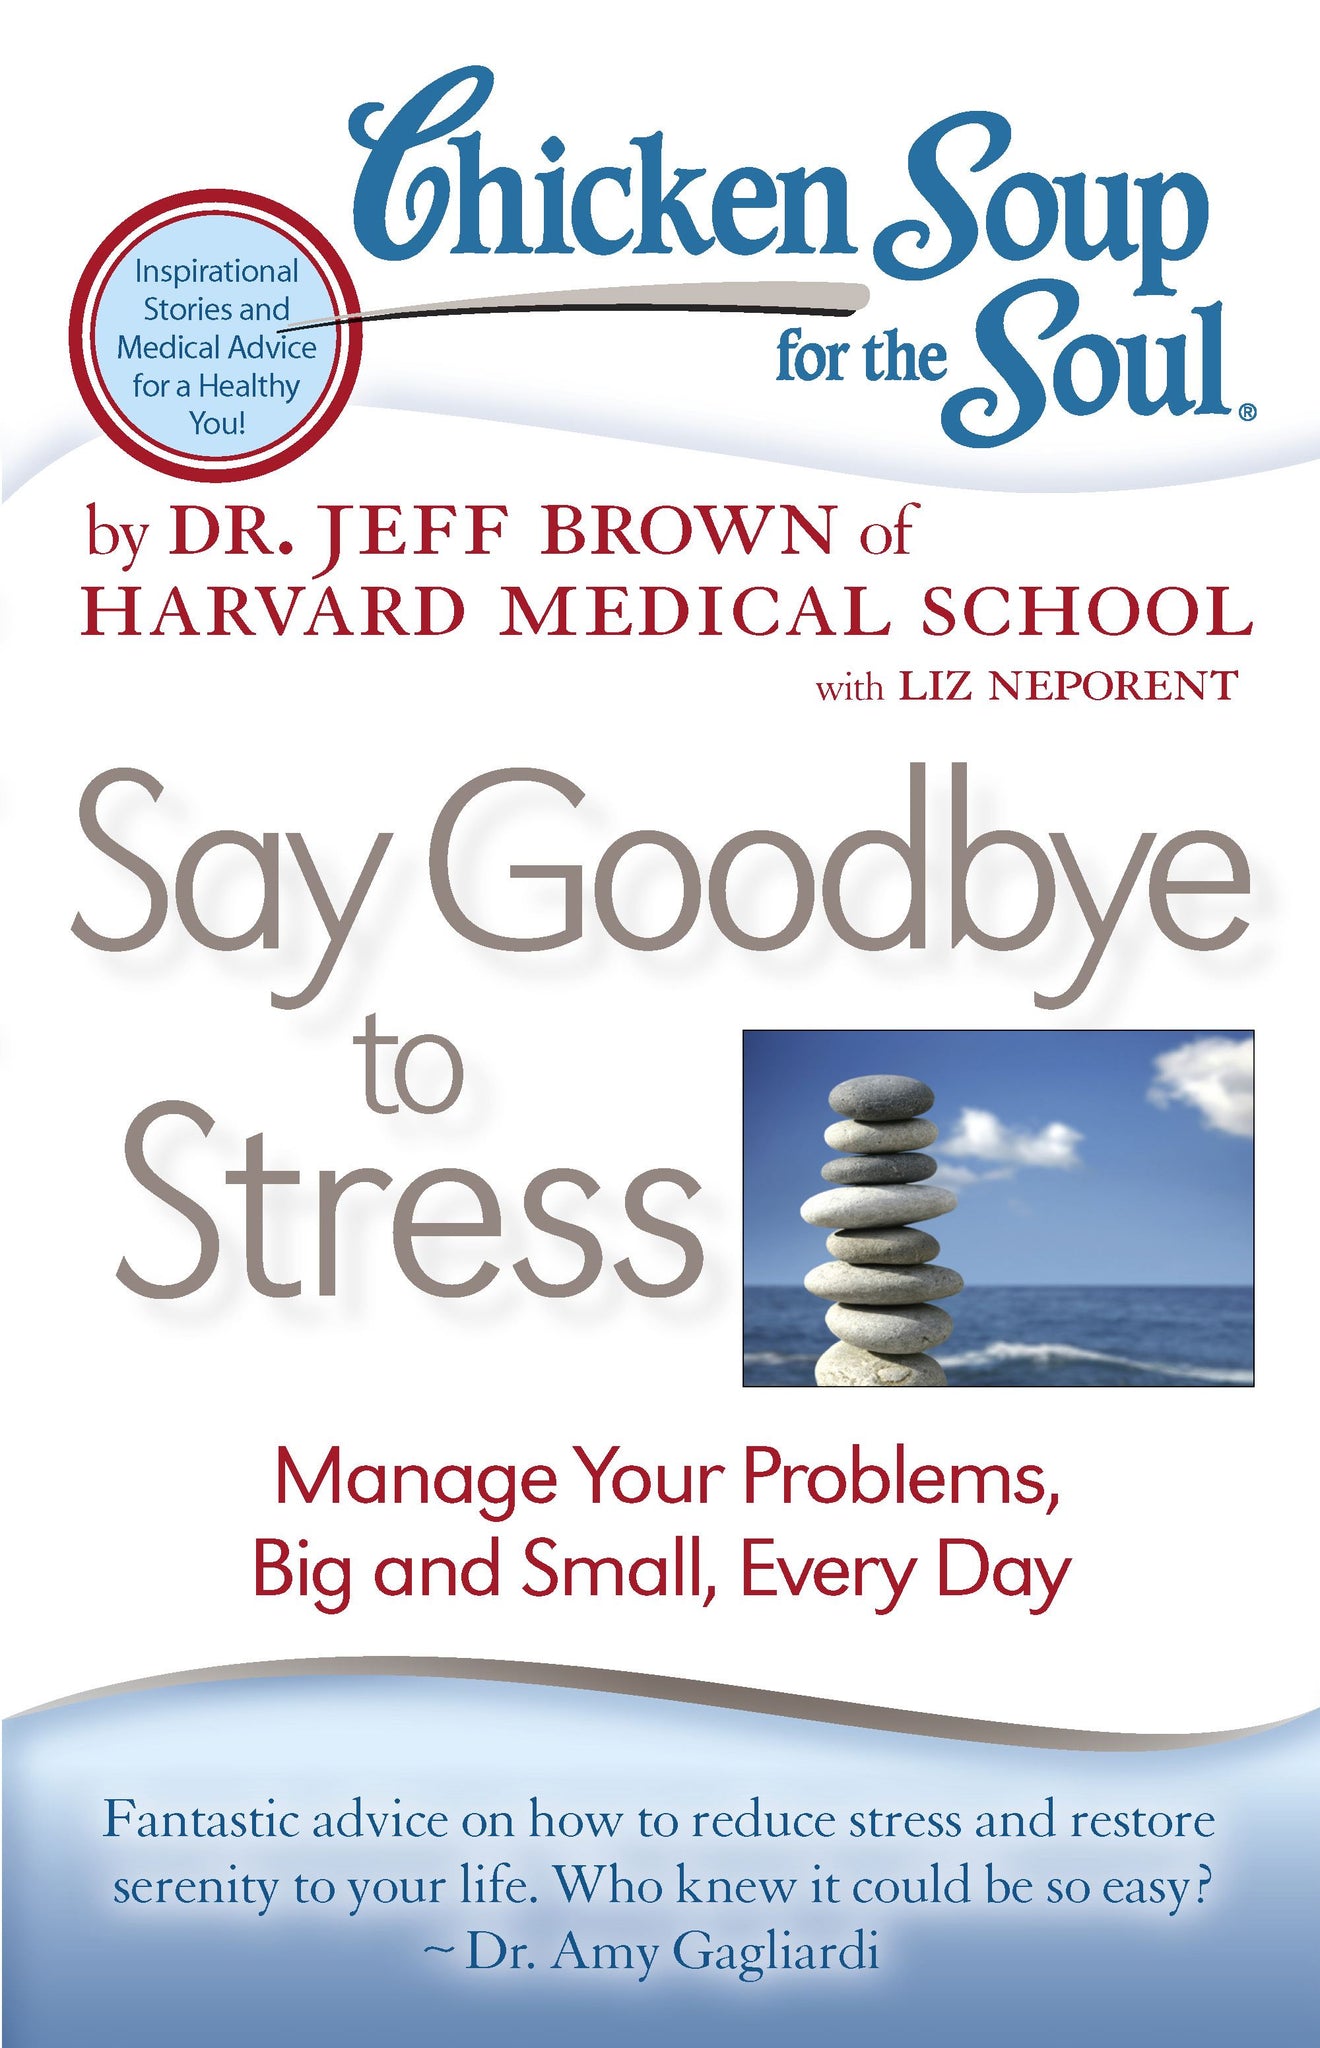 Chicken Soup for the Soul: Say Goodbye to Stress : Manage Your Problems, Big and Small, Every Day